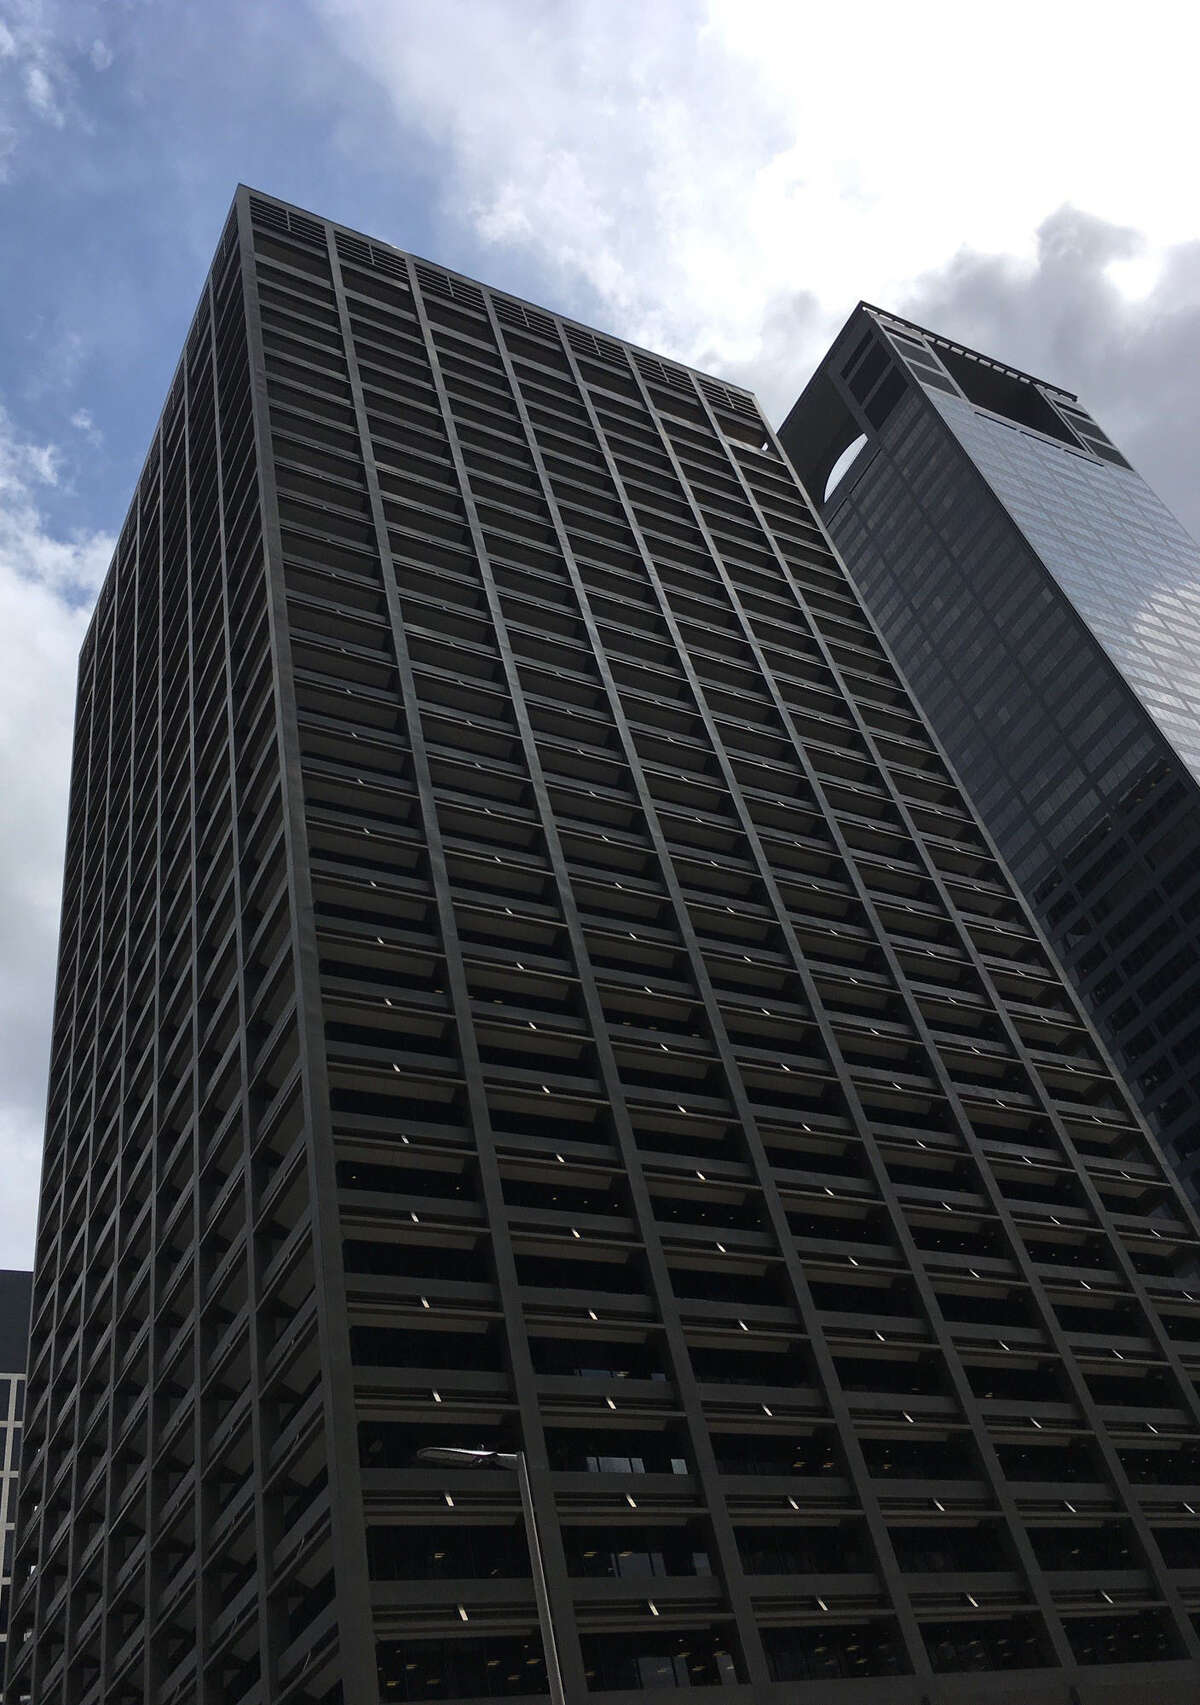 The 32-story Kinder Morgan building is at 1001 Louisiana in downtown Houston.